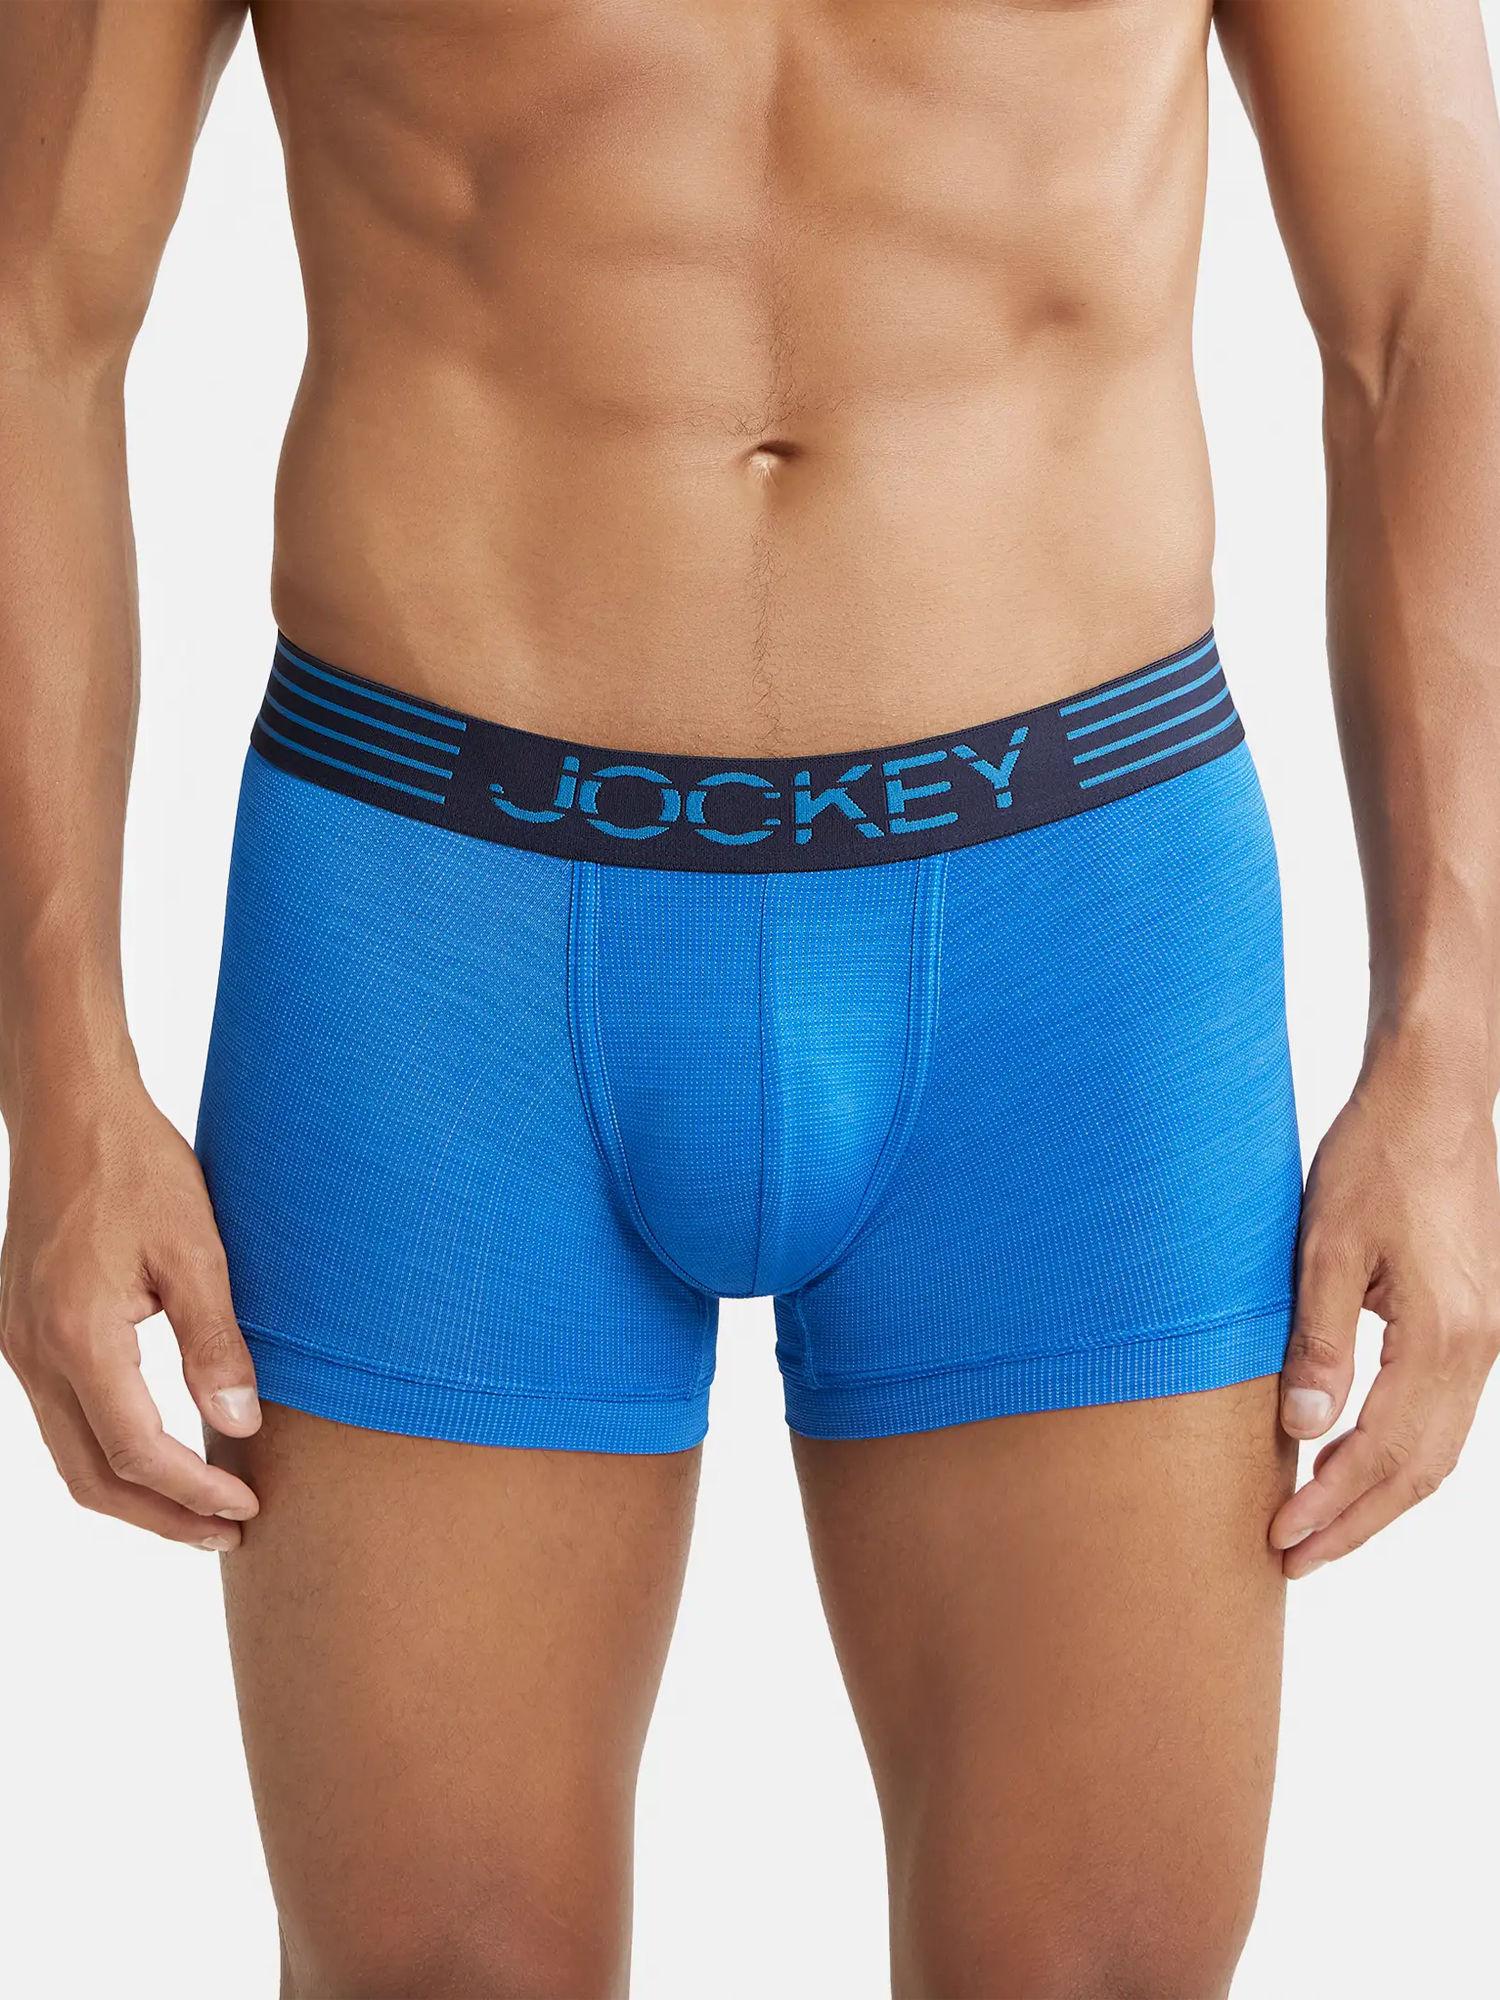 mm05 mens microfiber mesh sports trunk with stay dry technology-blue